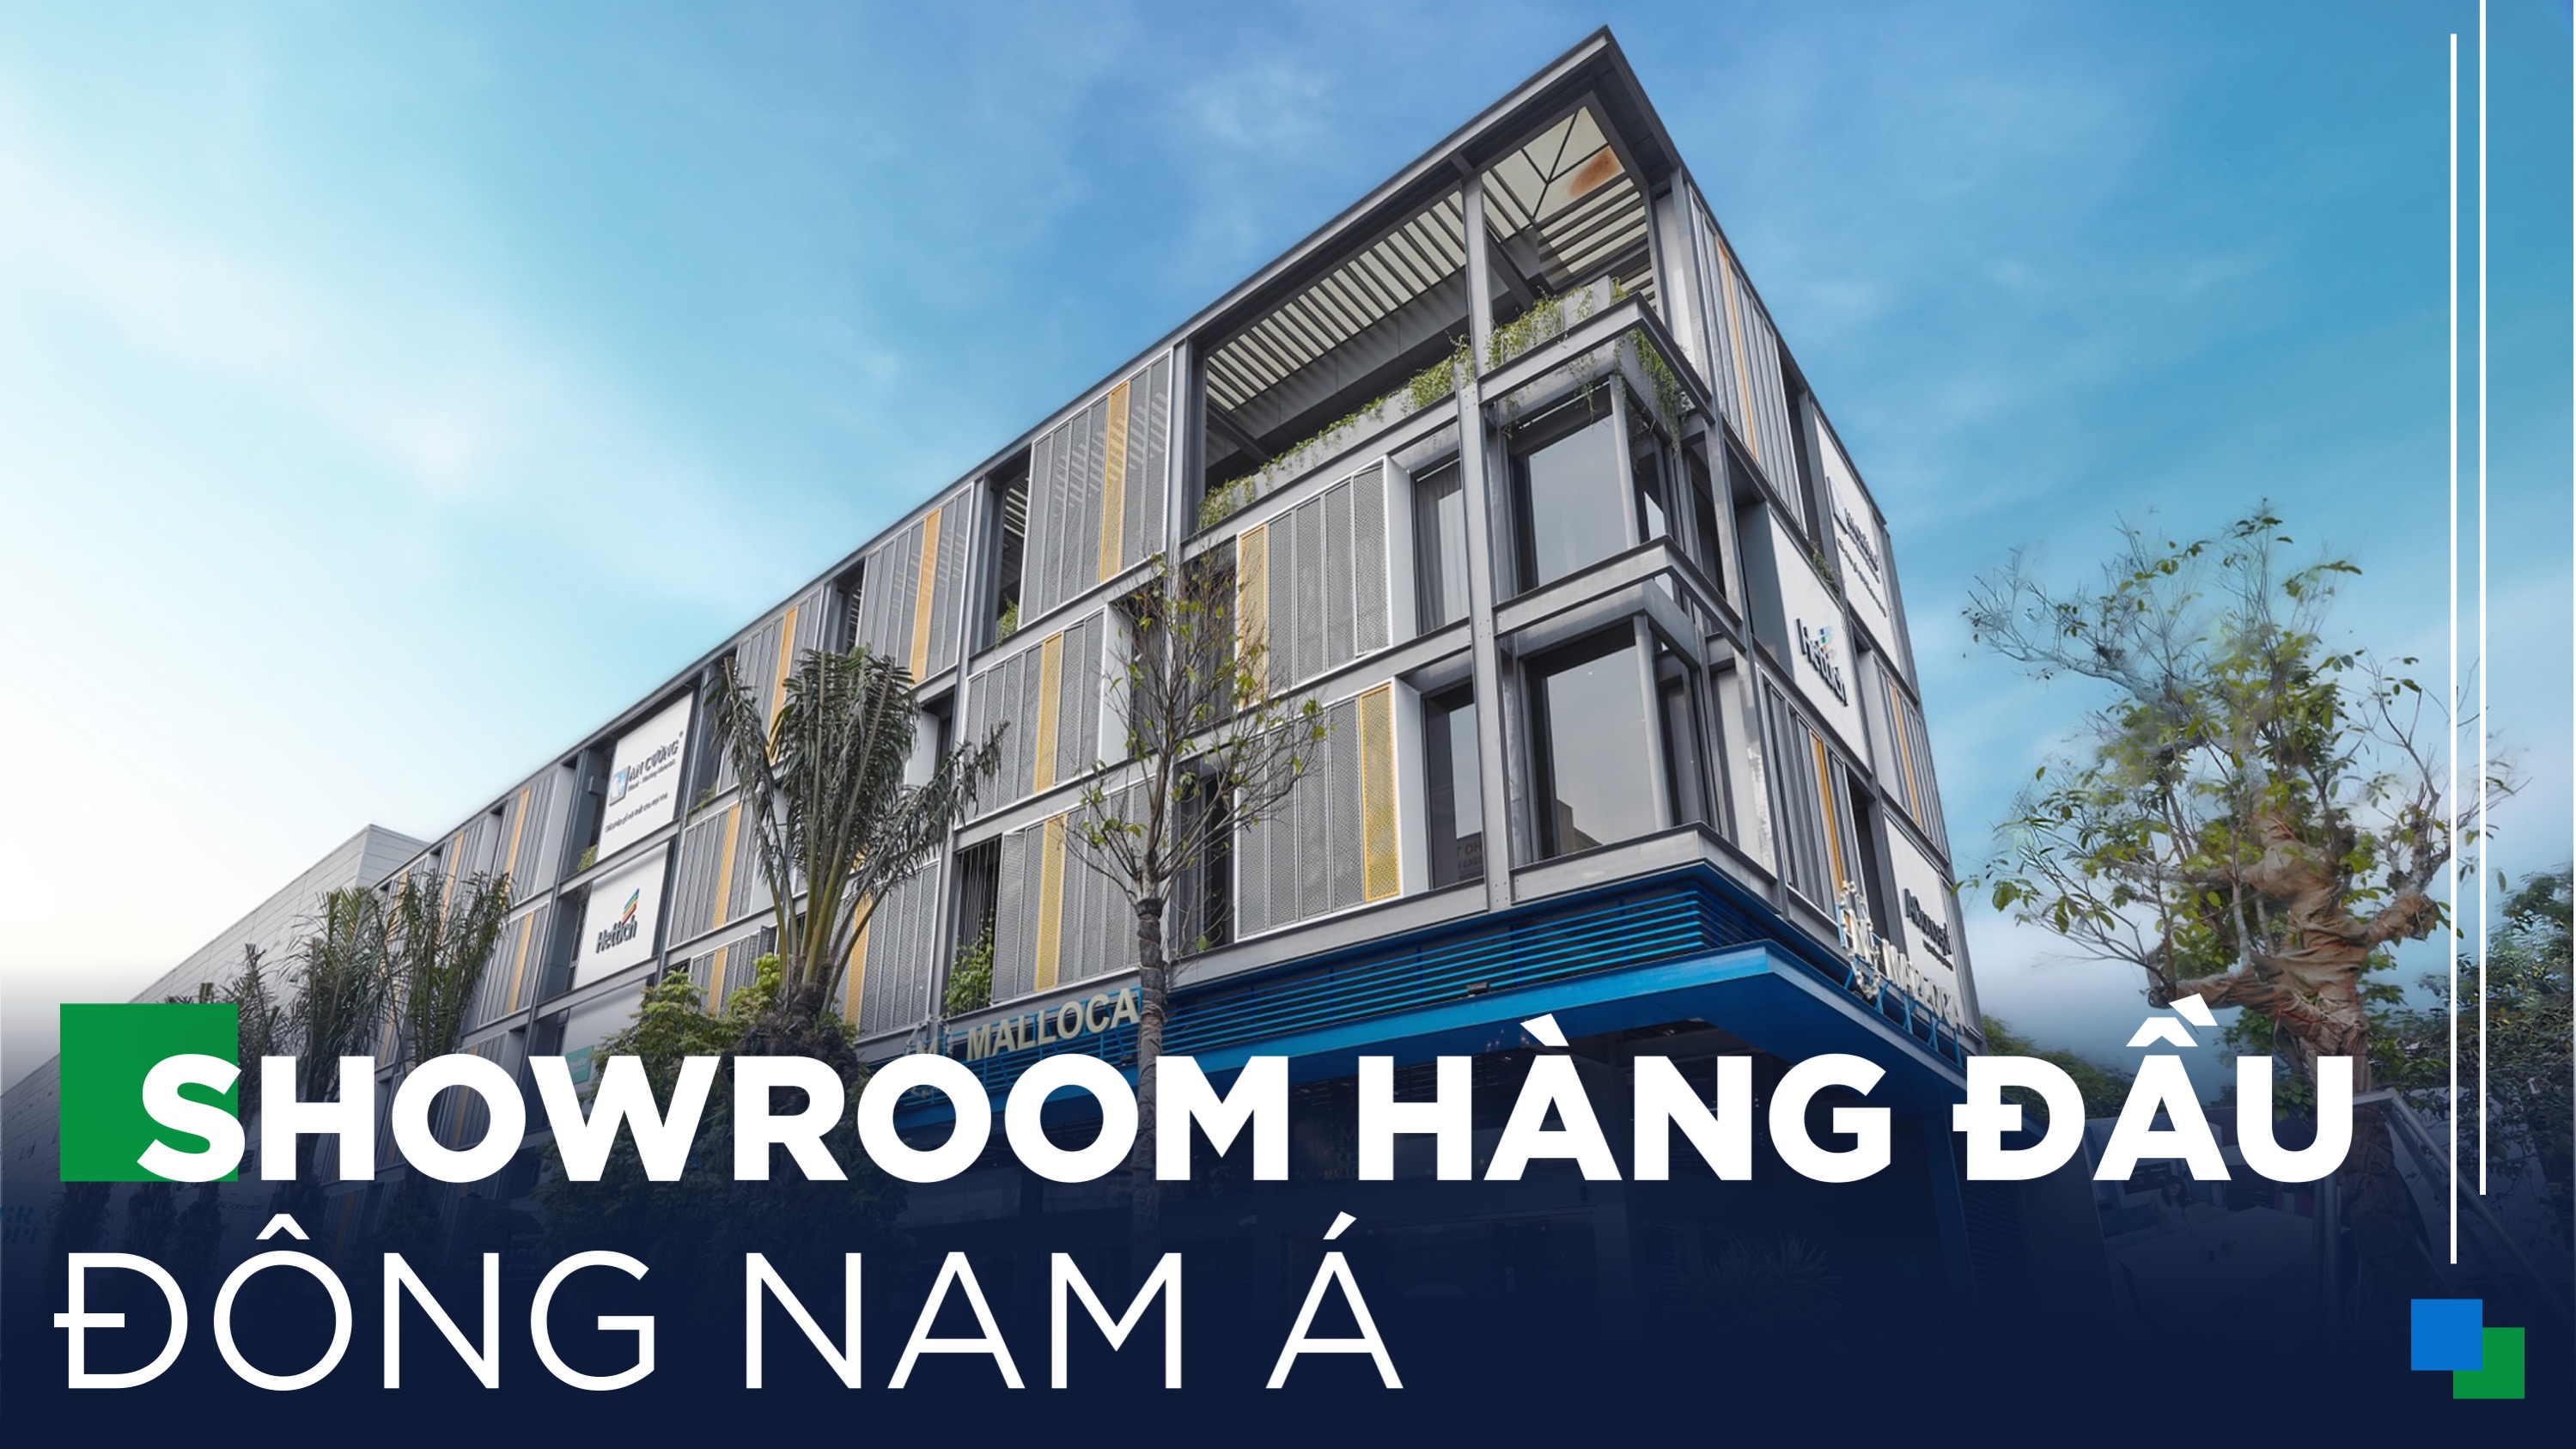 Material Showroom - Southeast Asia's Leading Furniture & Solutions What's there? Hanoi One-Stop Shopping Center